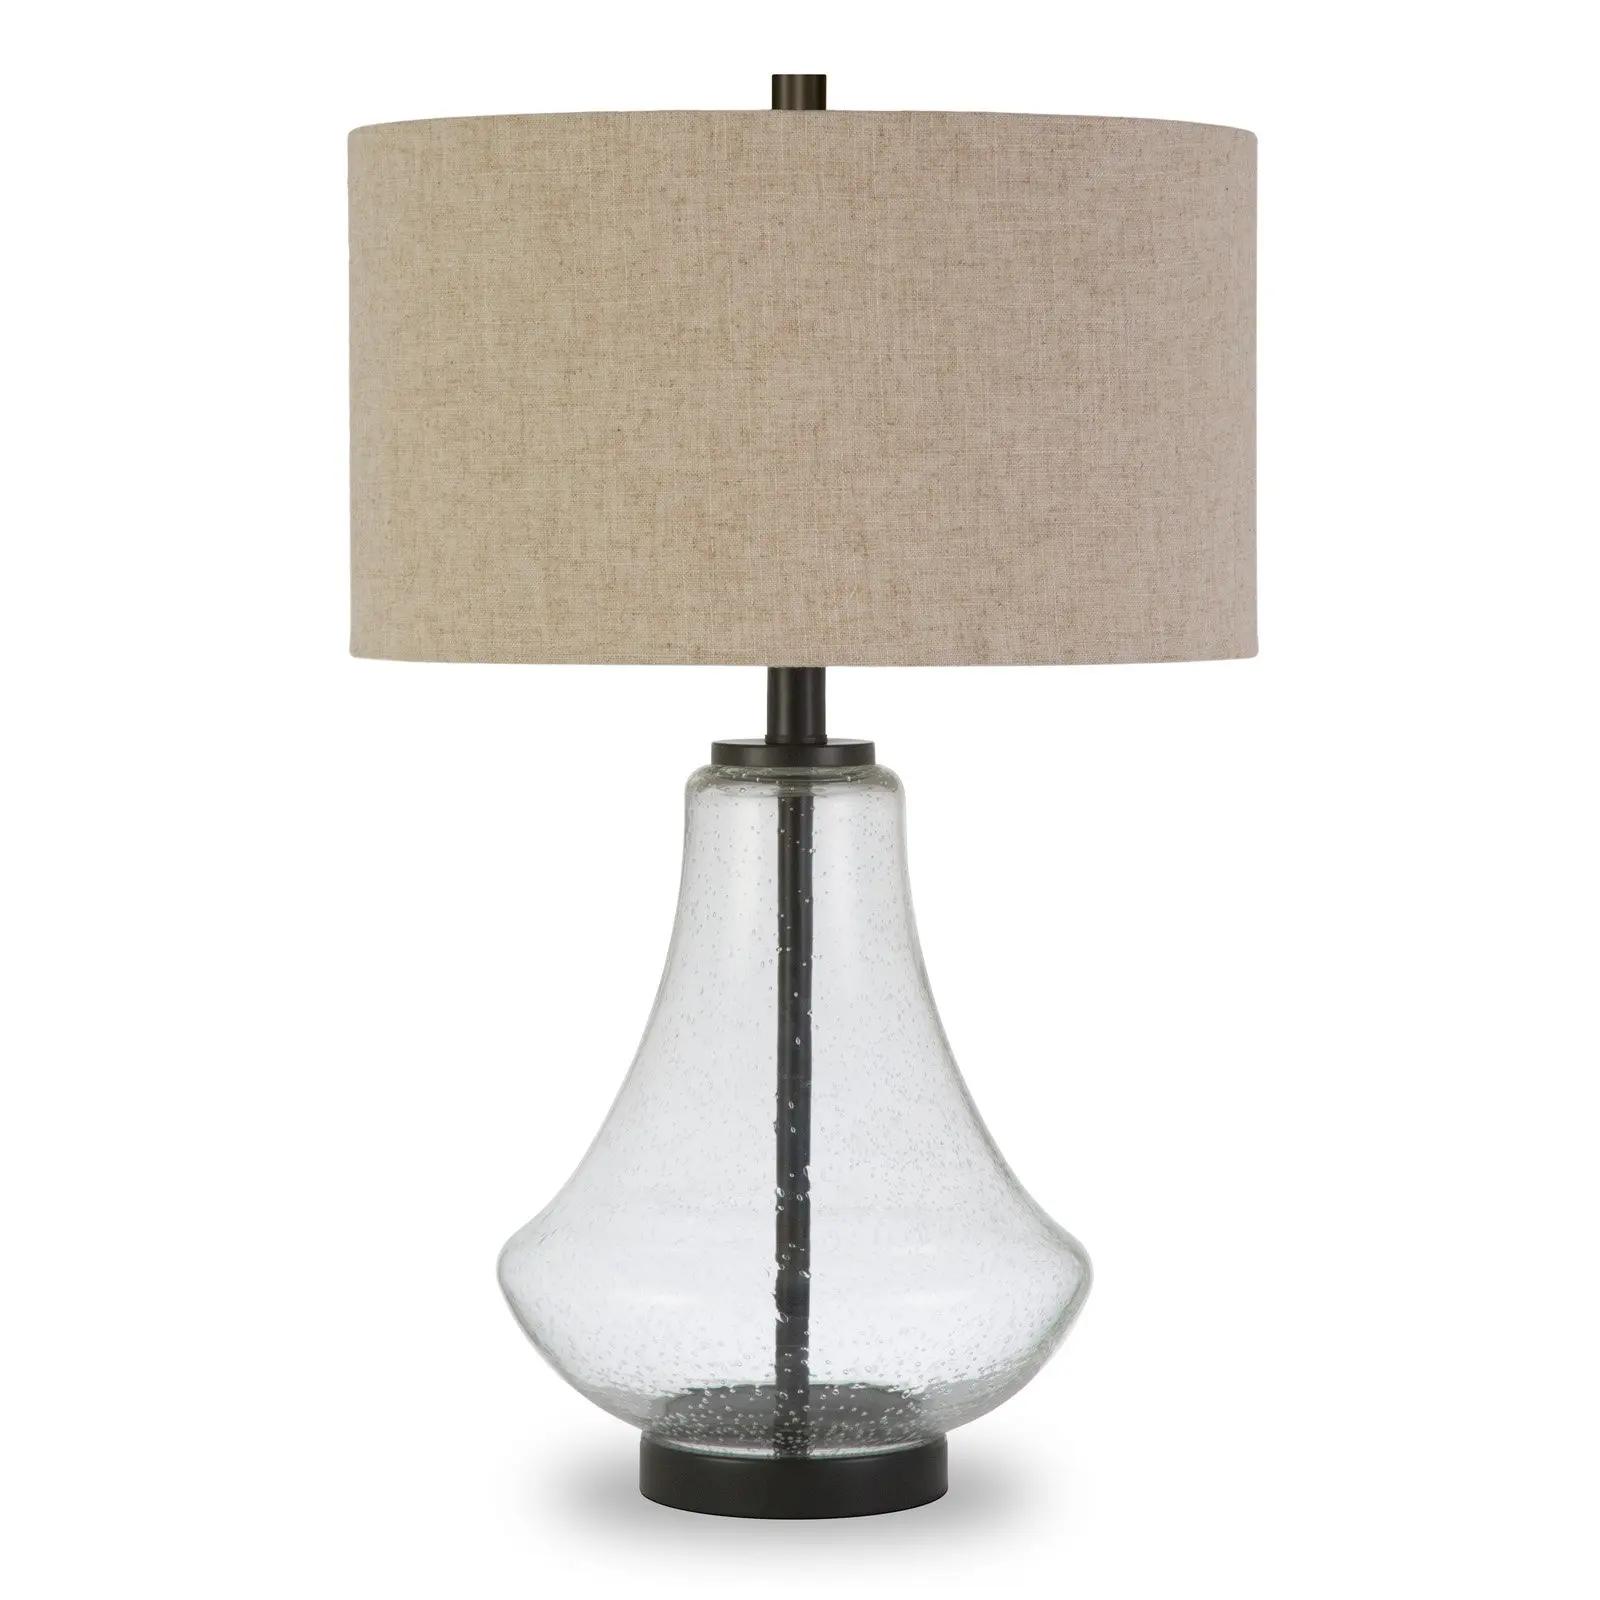 Traditional Seeded Glass Table Lamp with Flax Shade